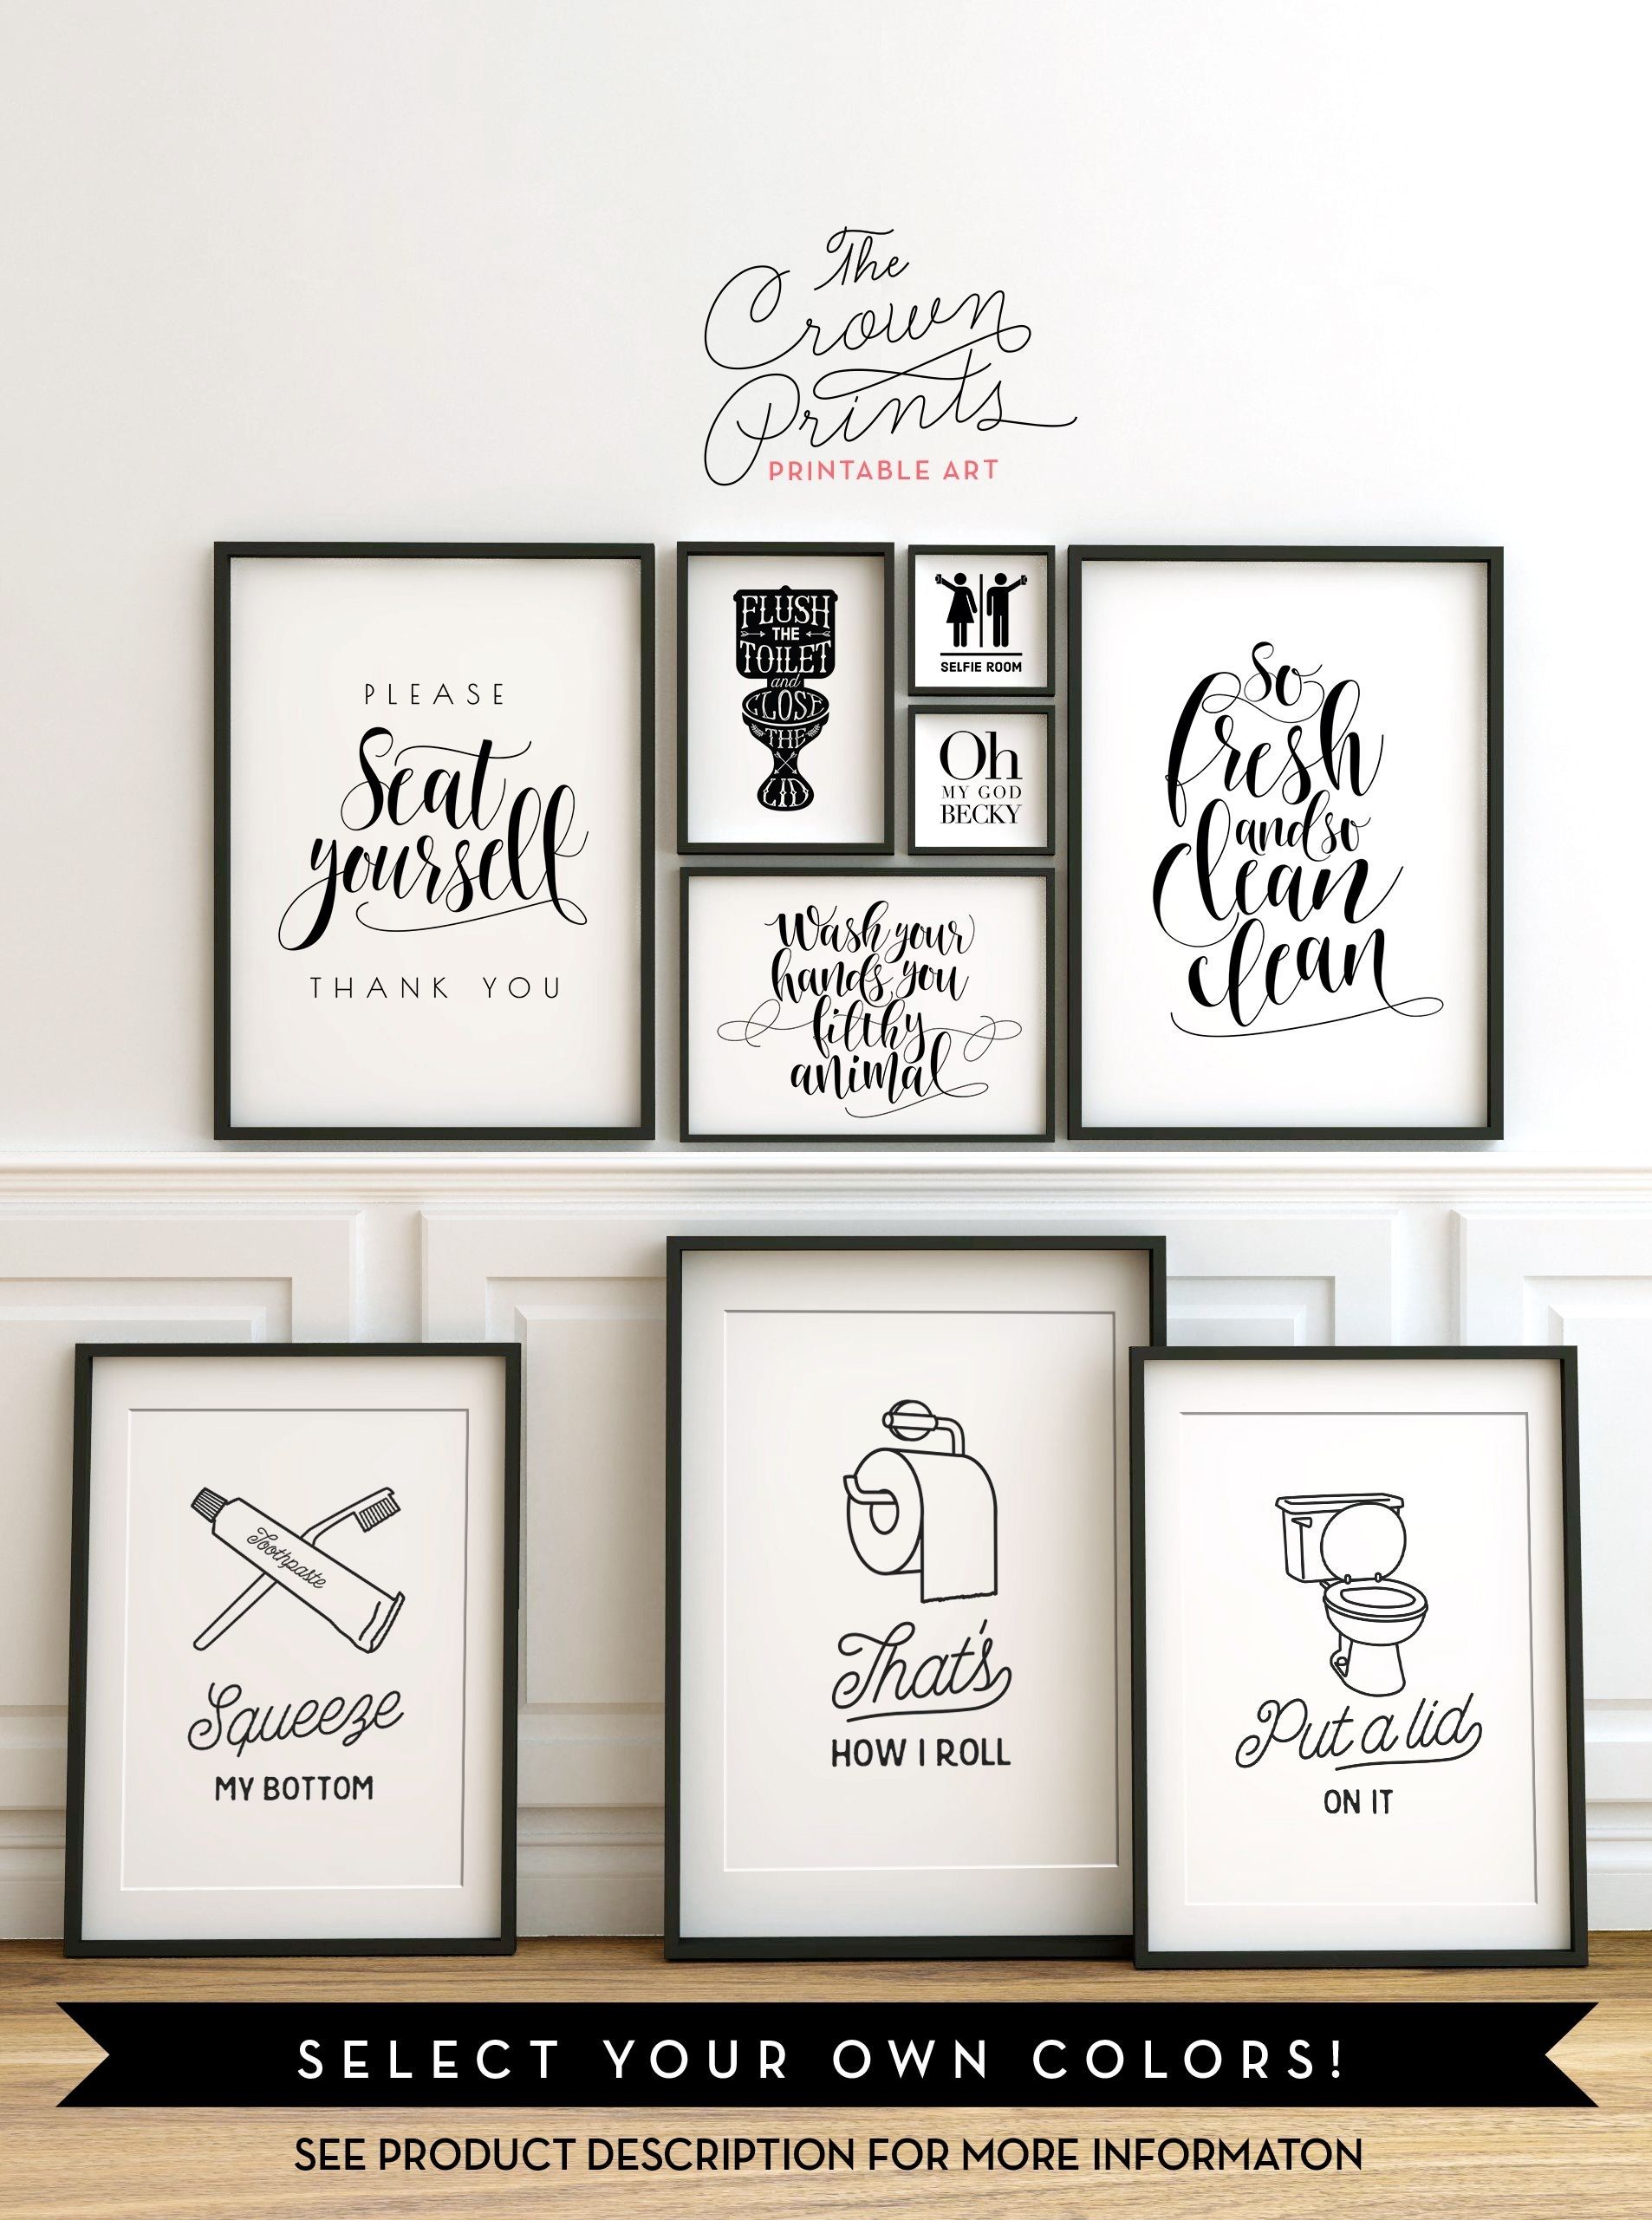 Printable Bathroom Wall Art From The Crown Prints On Etsy – Lots Of With Bathroom Wall Art (View 2 of 20)